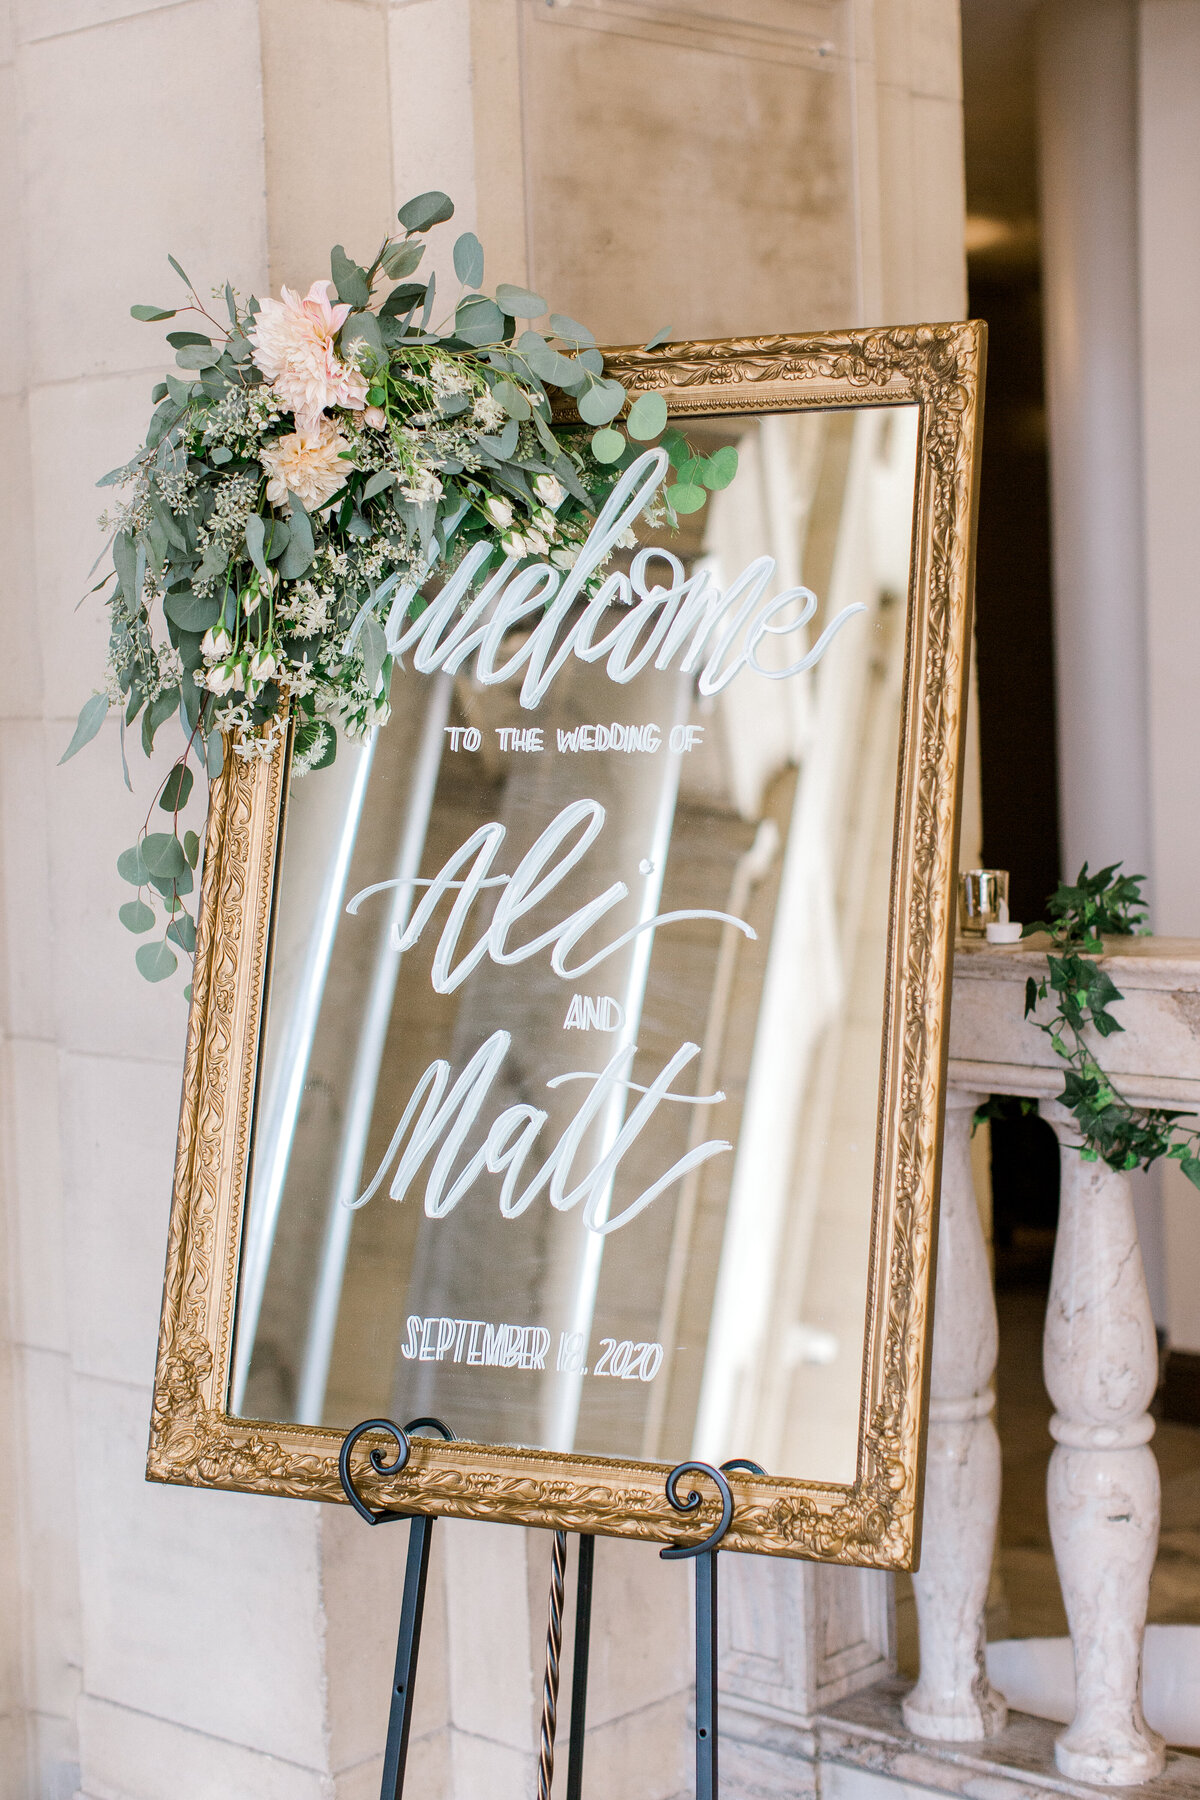 Brenna Claire Calligraphy, photo by Marissa Camino Photography, LLC